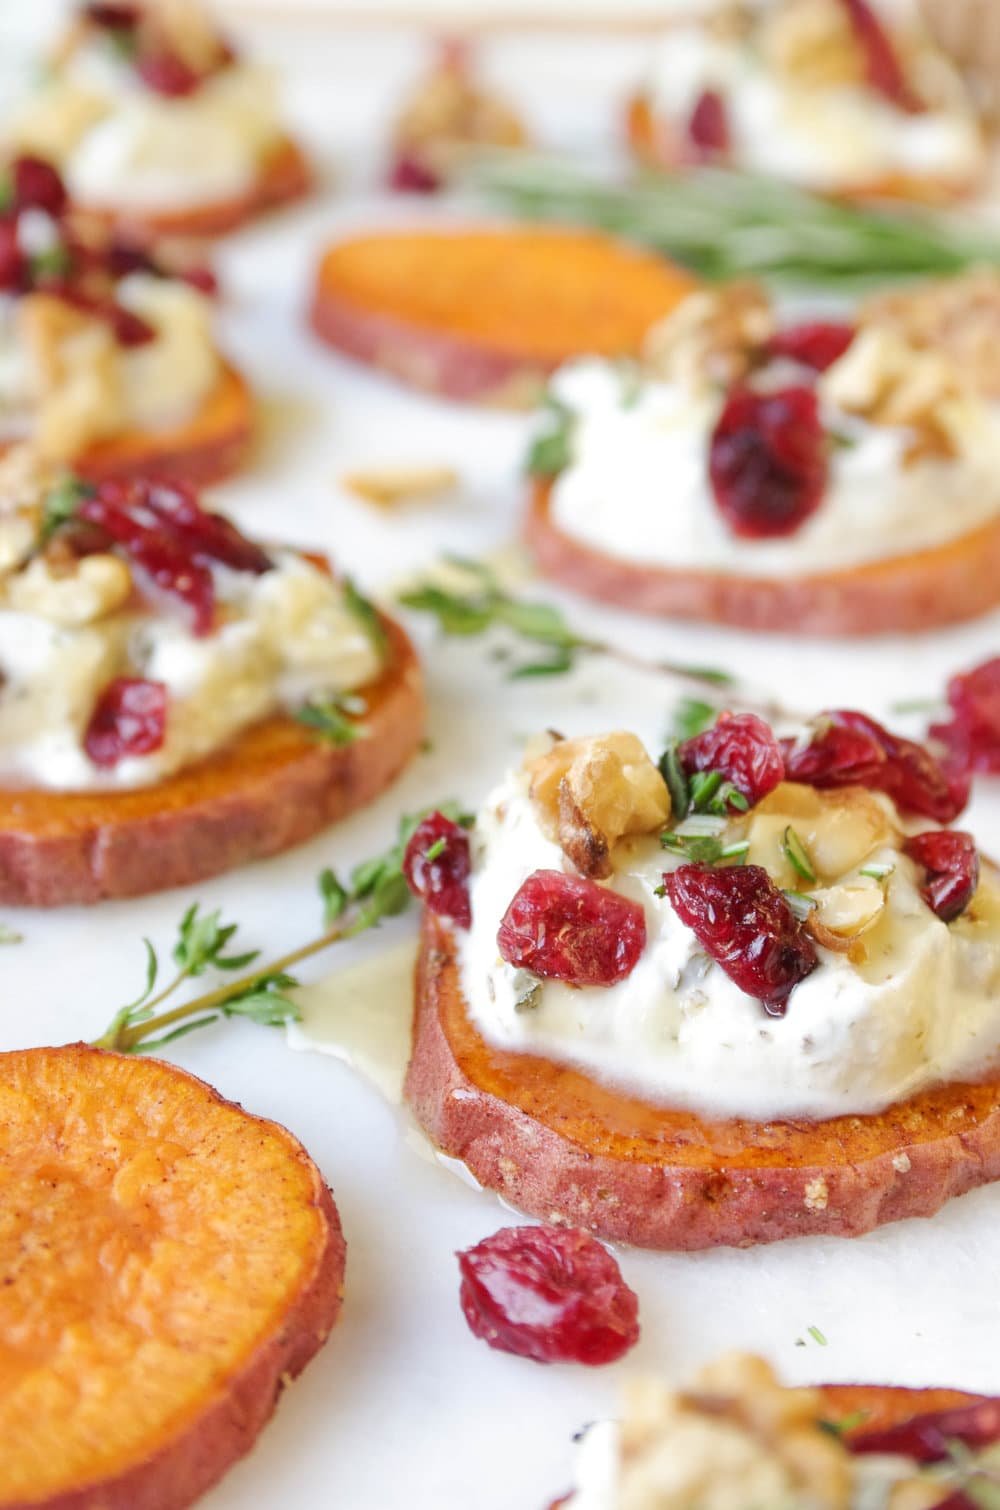 Baked Sweet Potato Rounds topped with a mixture of goat cheese, ricotta, and fresh herbs and garnished with dried cranberries, walnuts, and honey.